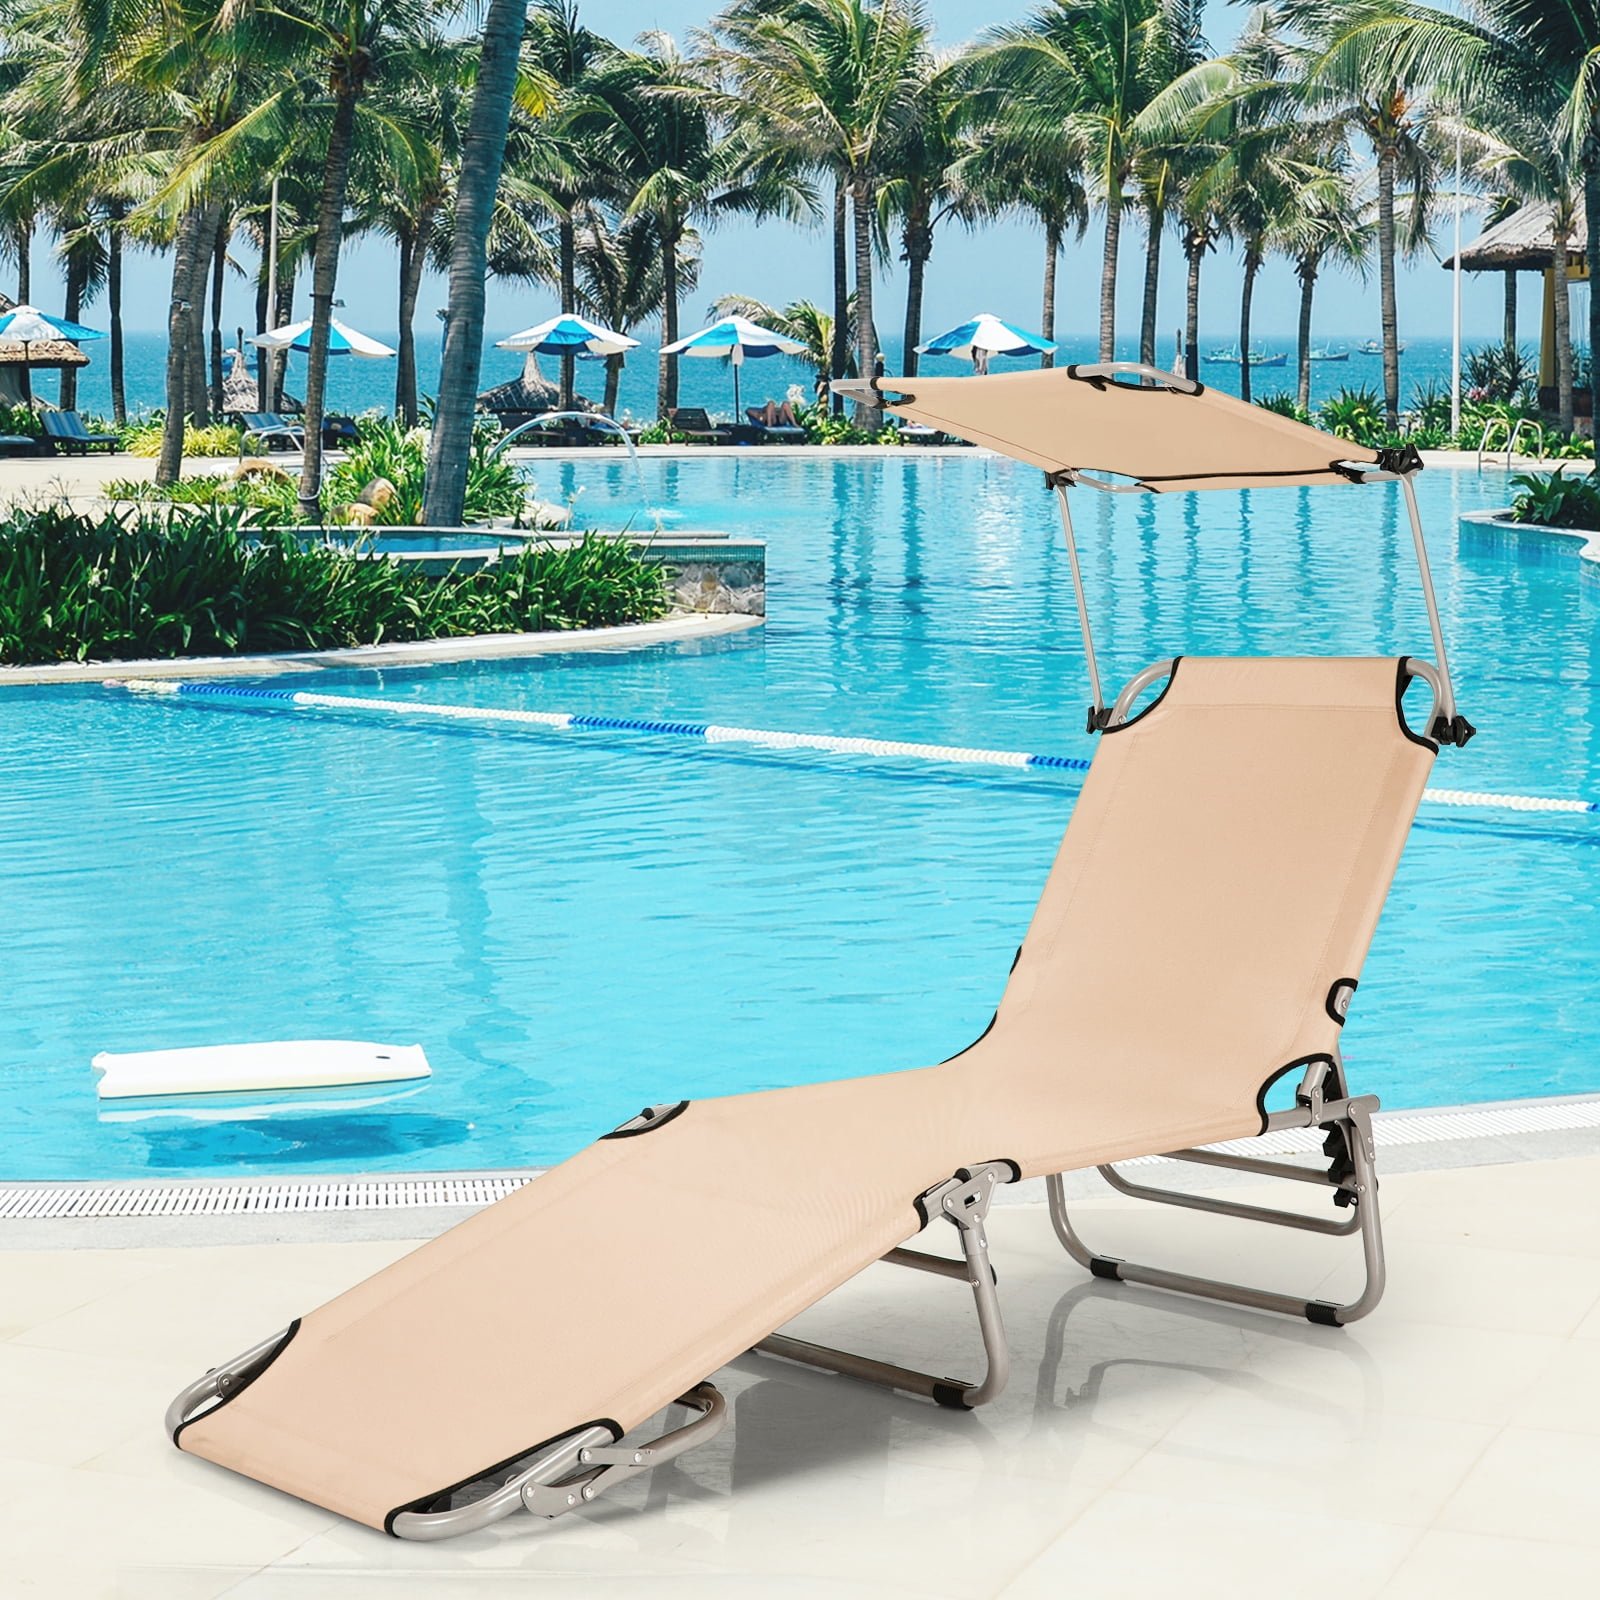 2, Beige Heavy Duty Sunbathing Recliner Cot for Outdoor Patio Yard Poolside GYMAX Folding Chaise Longue Adjustable Beach Chair with Canopy Sun Shade & Side Pockets